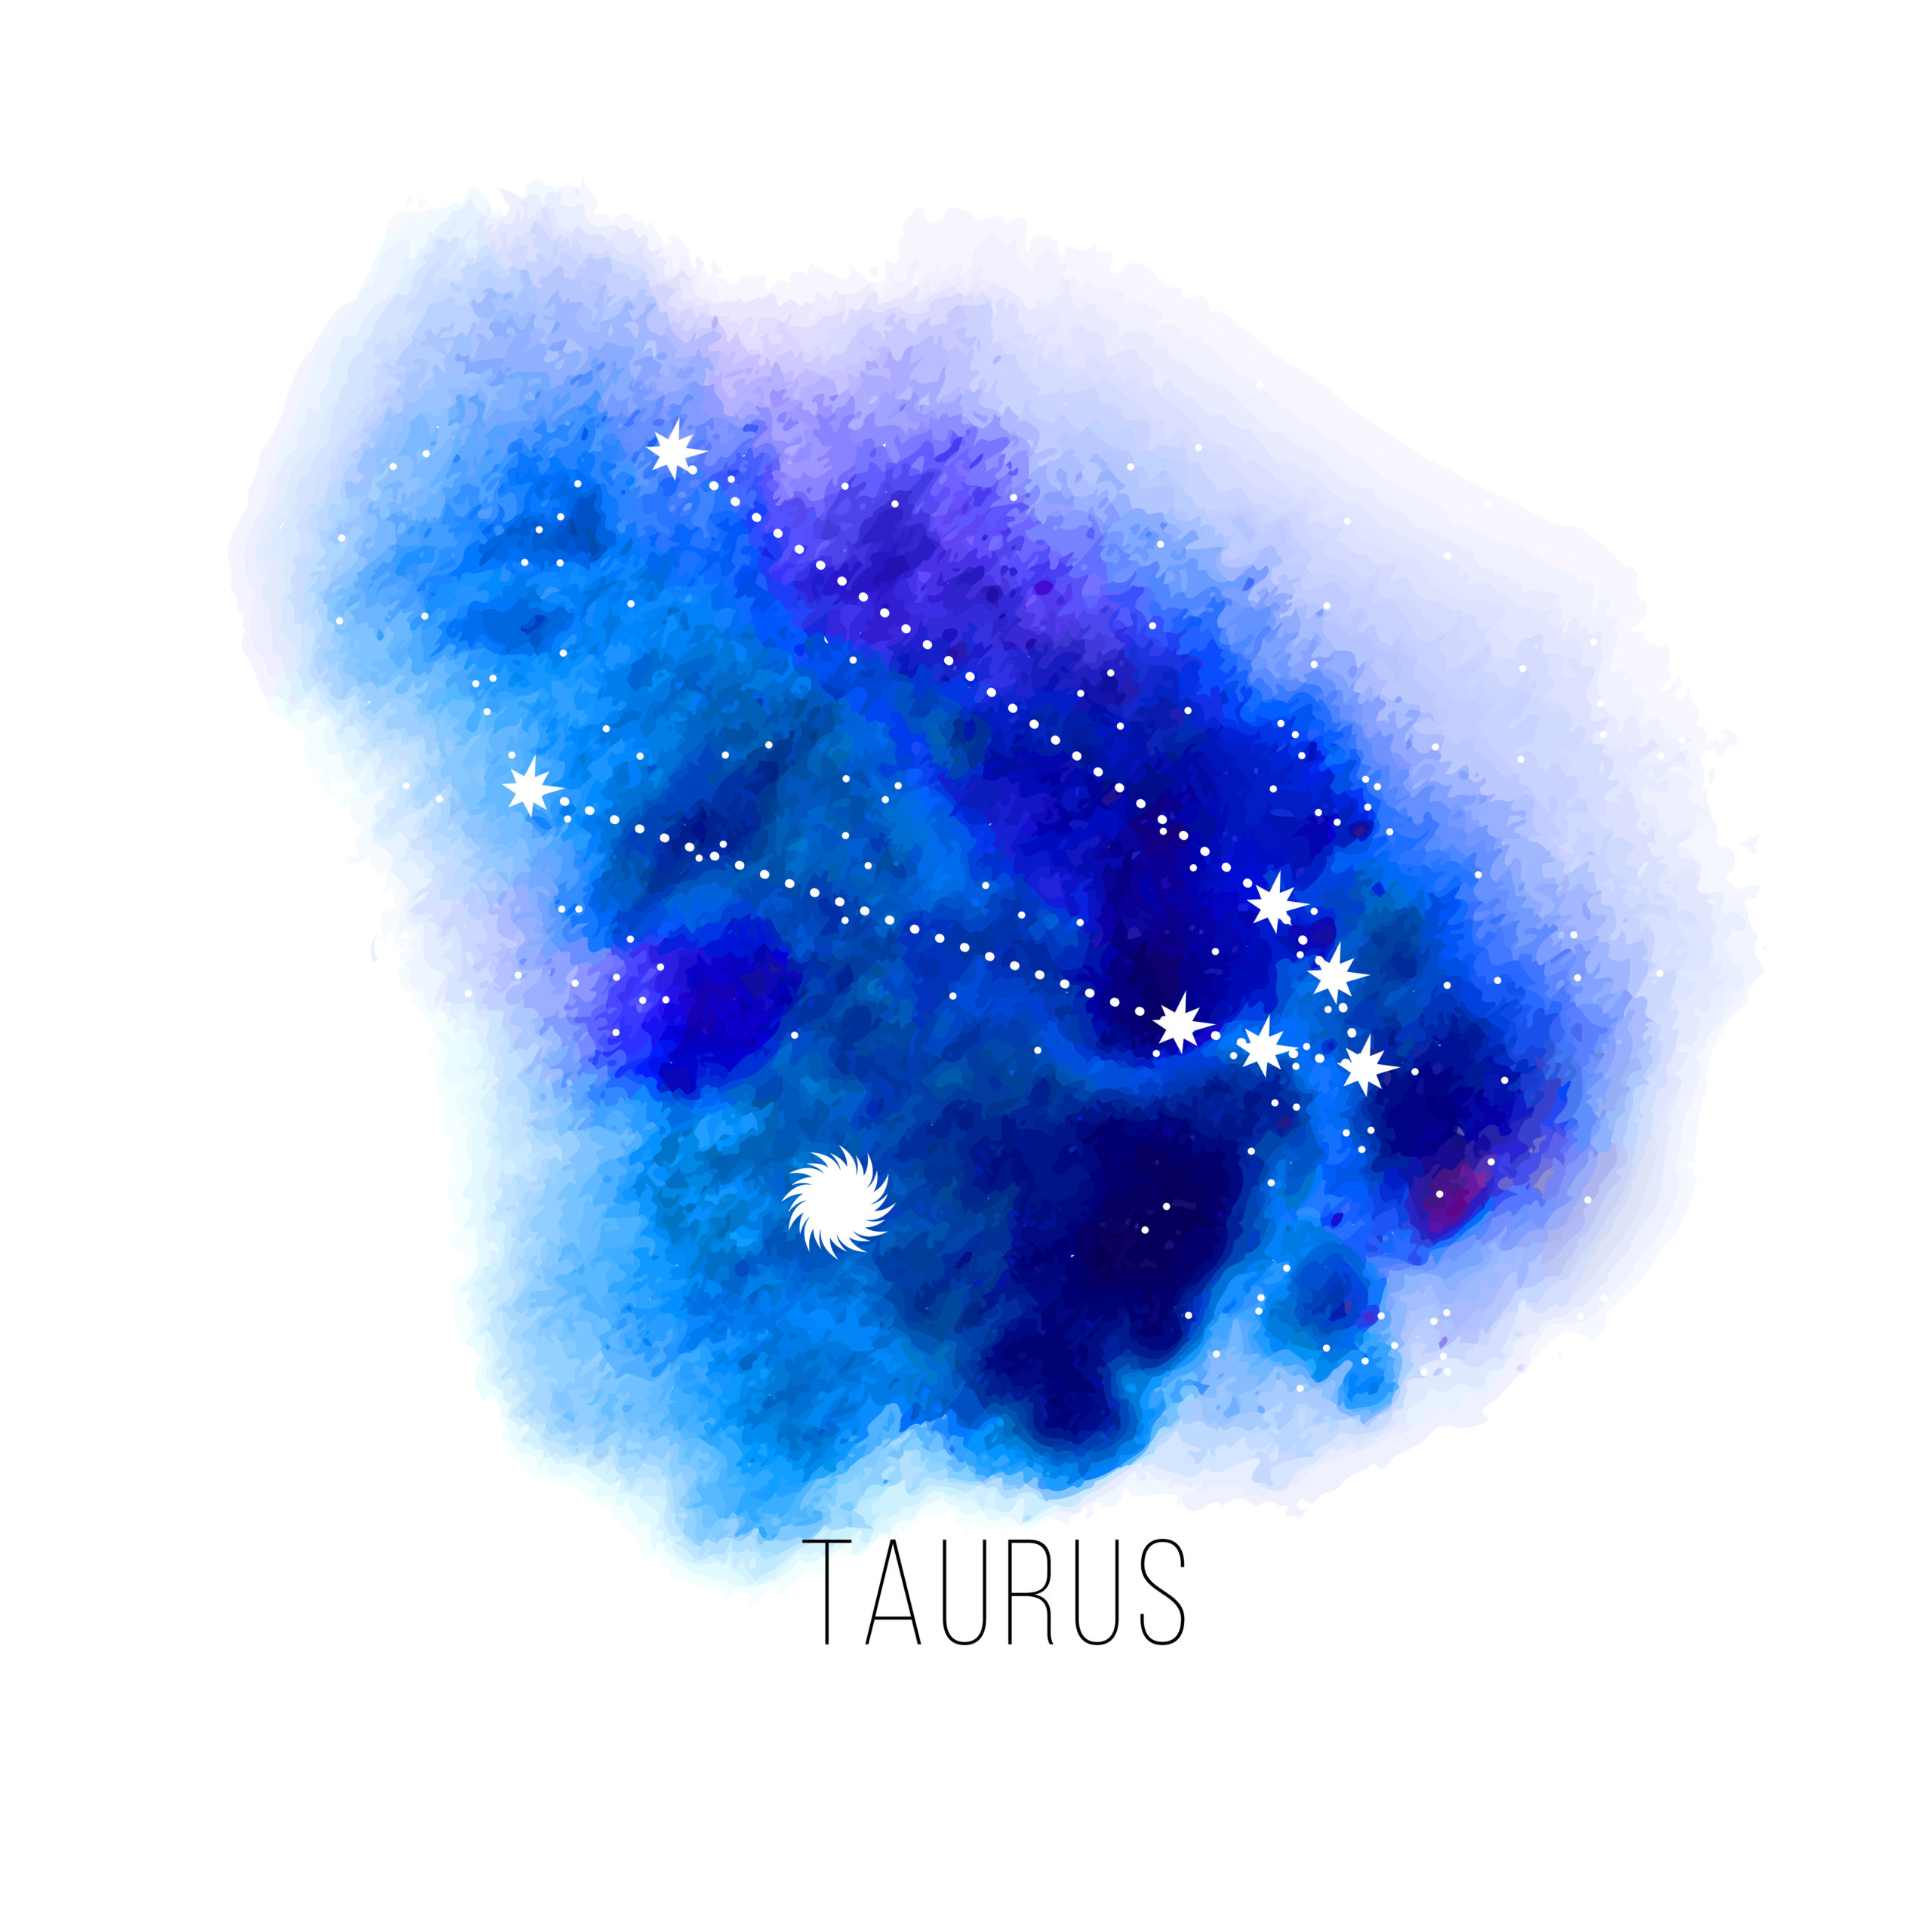 Astrology sign Taurus on blue watercolor background. Zodiac constellation and part of zodiacal system and ancient calendar. Mystic symbol with stars, sun, moon and dots. Western horoscope illustration